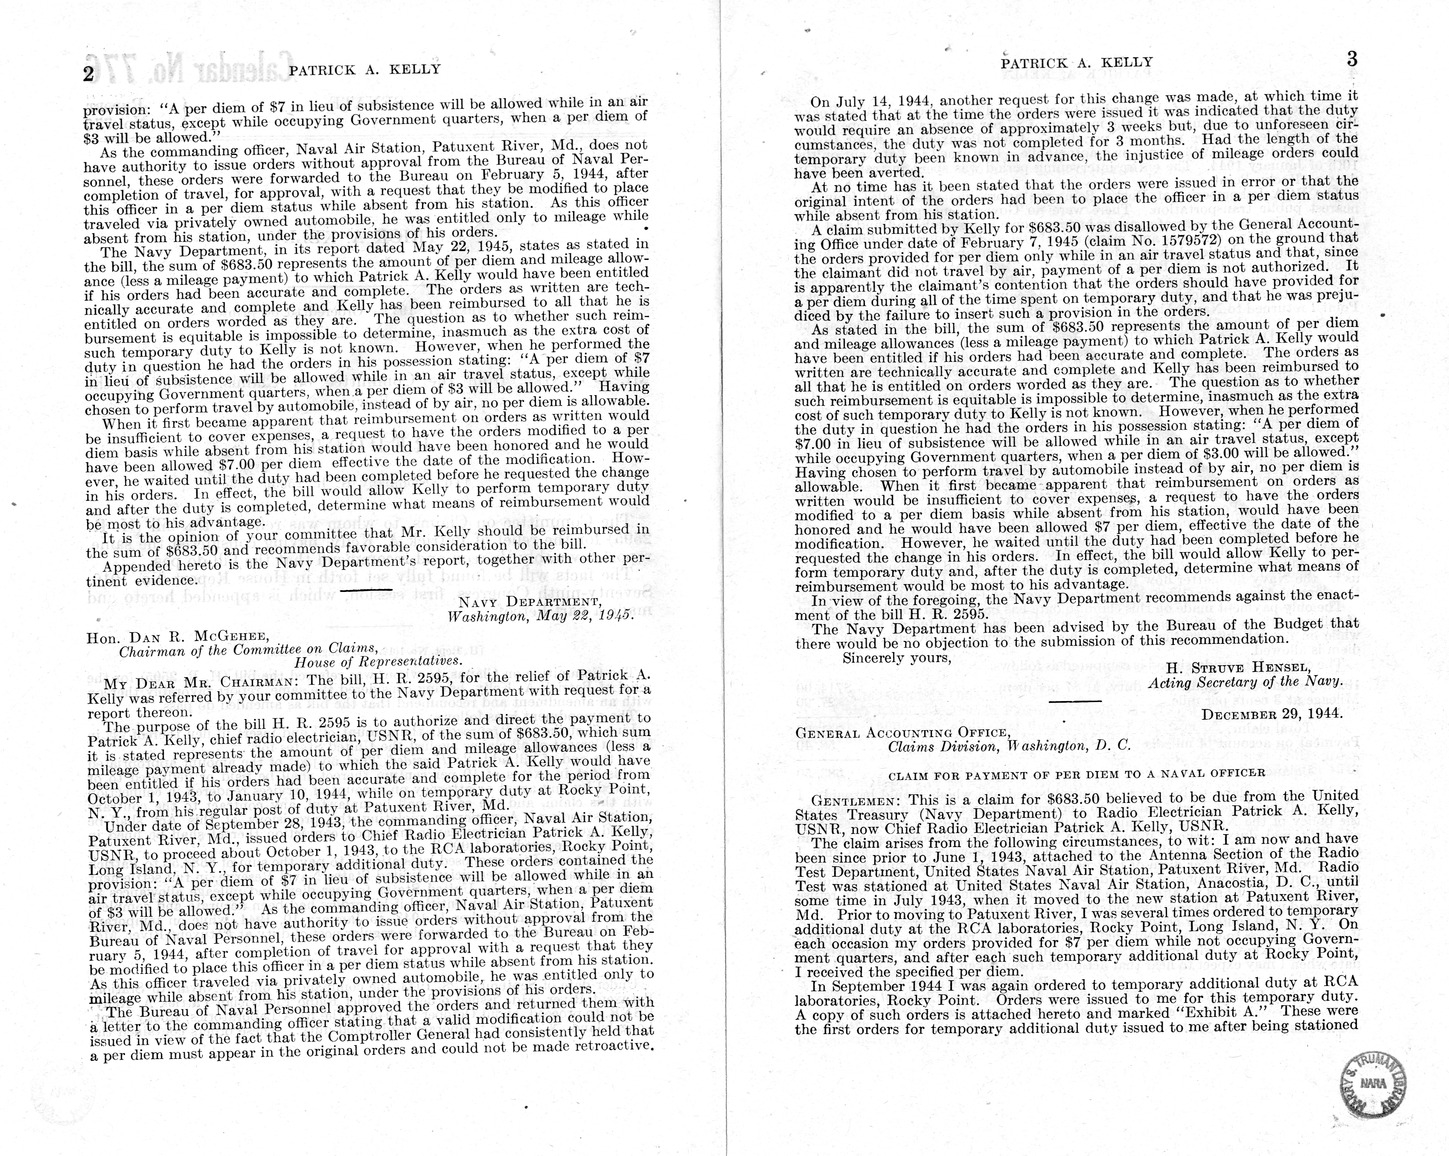 Memorandum from Frederick J. Bailey to M. C. Latta, H.R. 2595, For the Relief of Patrick A. Kelly, with Attachments